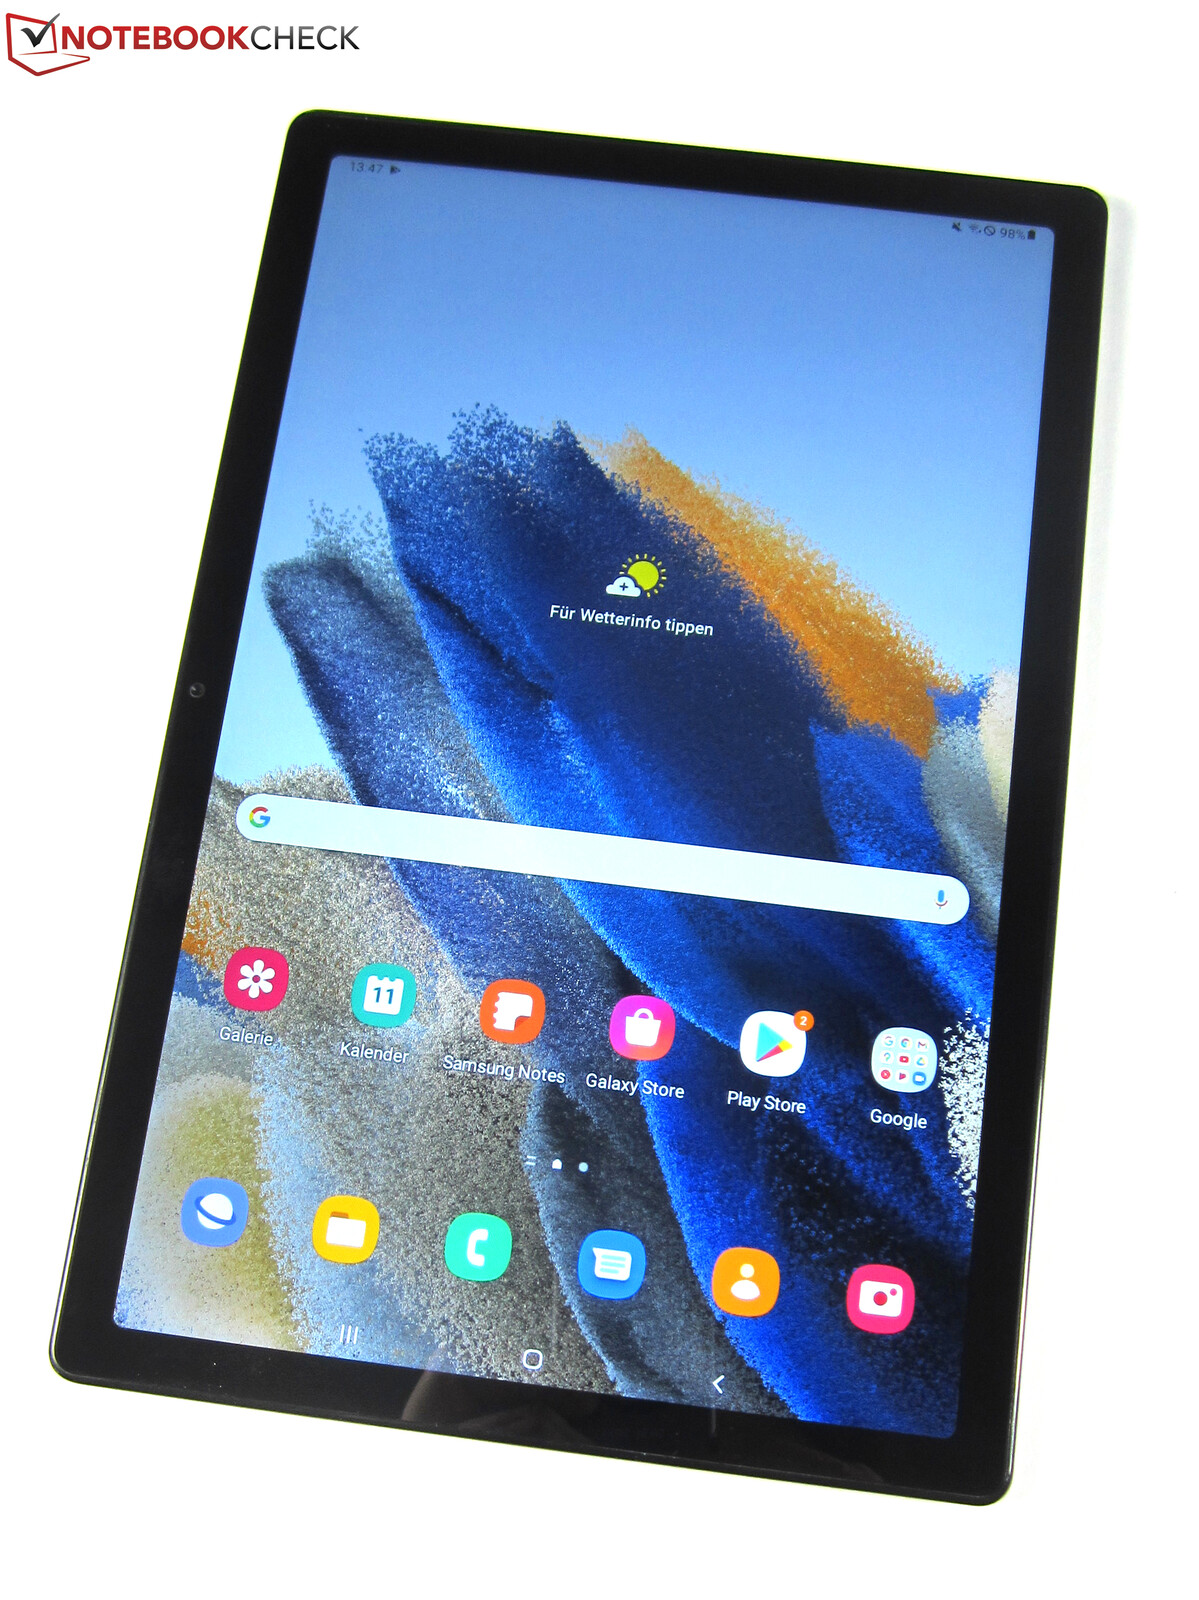 Samsung Galaxy Tab A8 - The new edition of the affordable mid